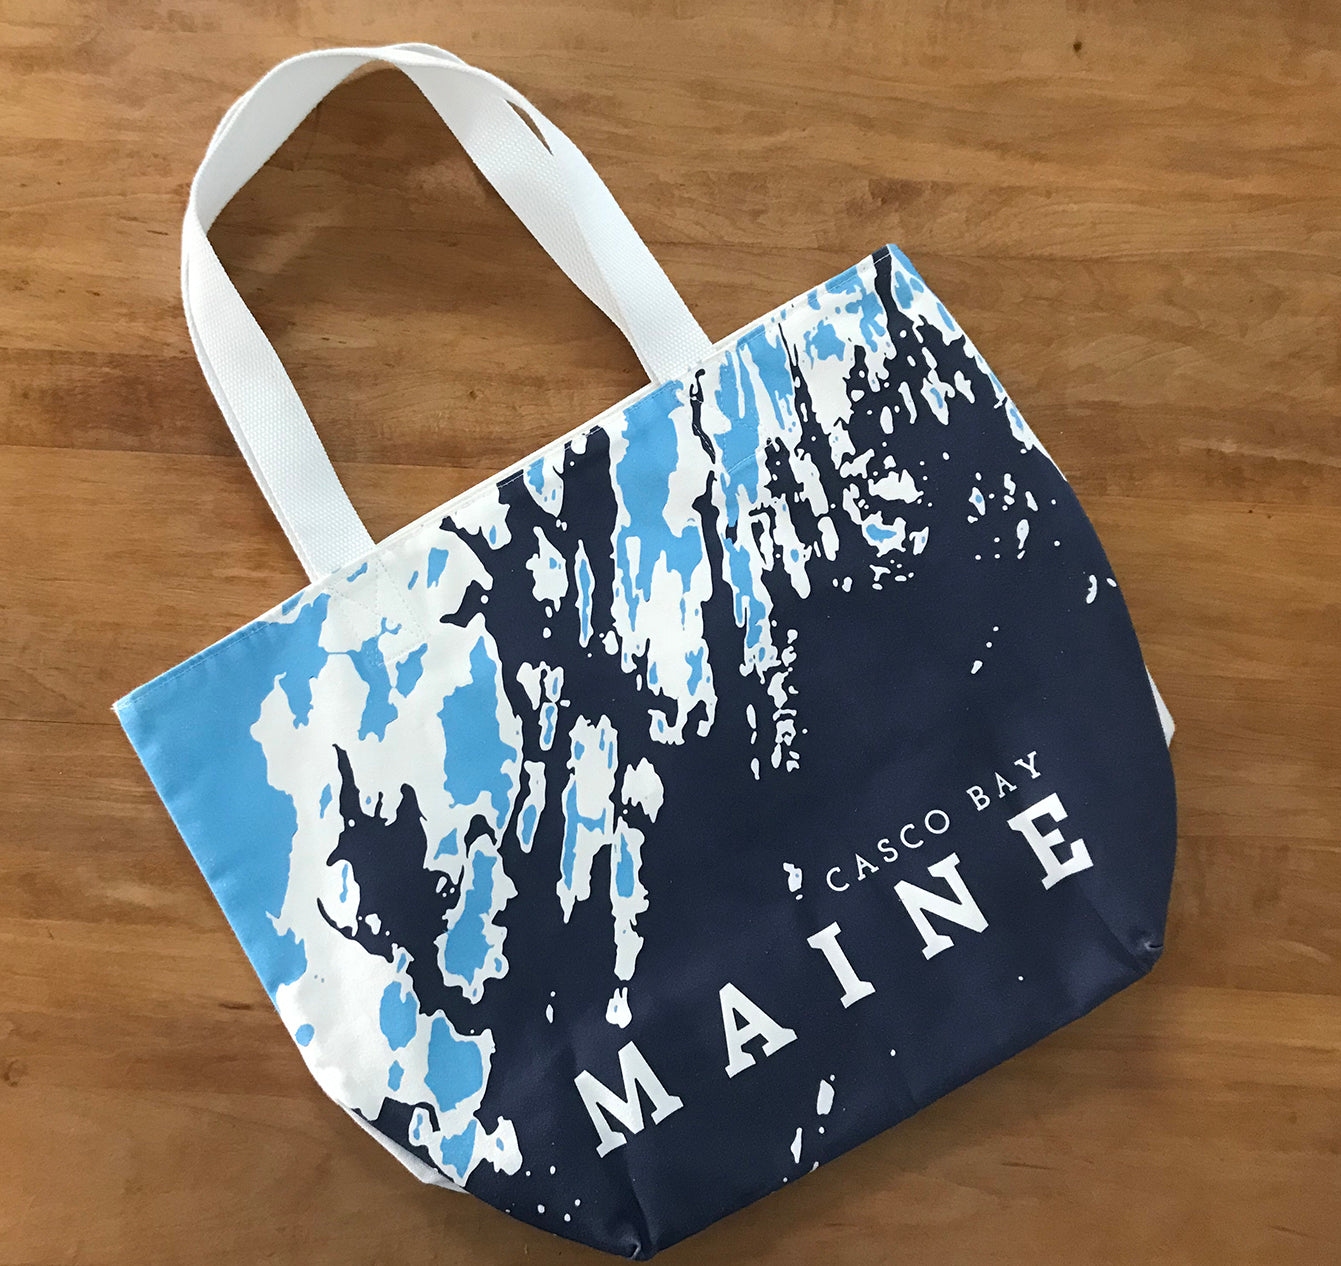 ONE-OF-A-KIND Open Sailor's Tote, Casco Bay Maine, Blue